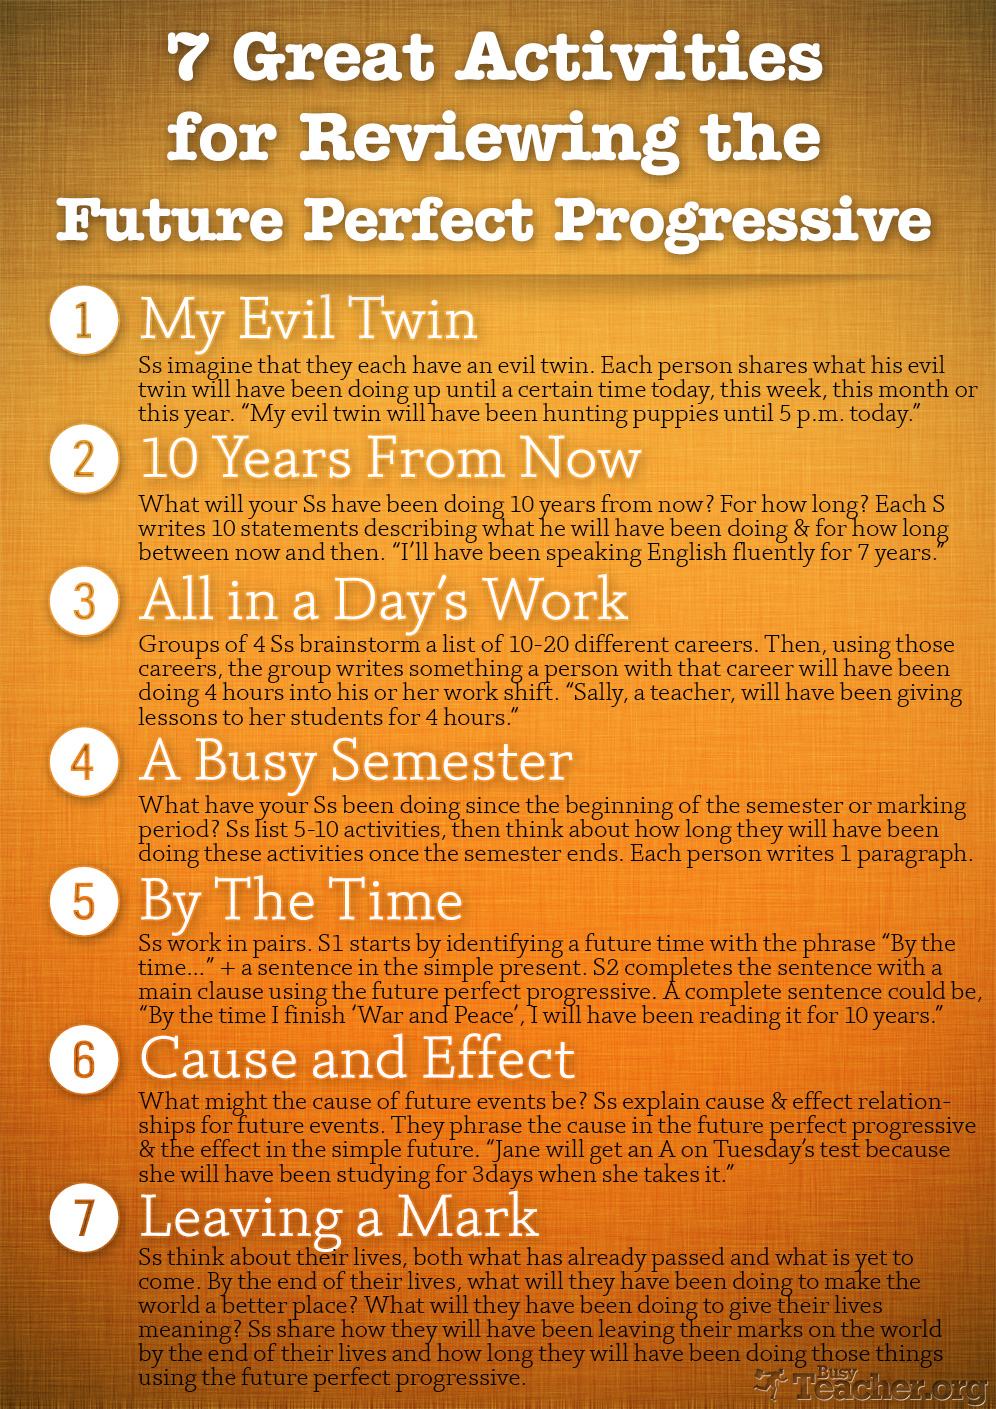 7 Great Activities to Review the Future Perfect Progressive: Poster